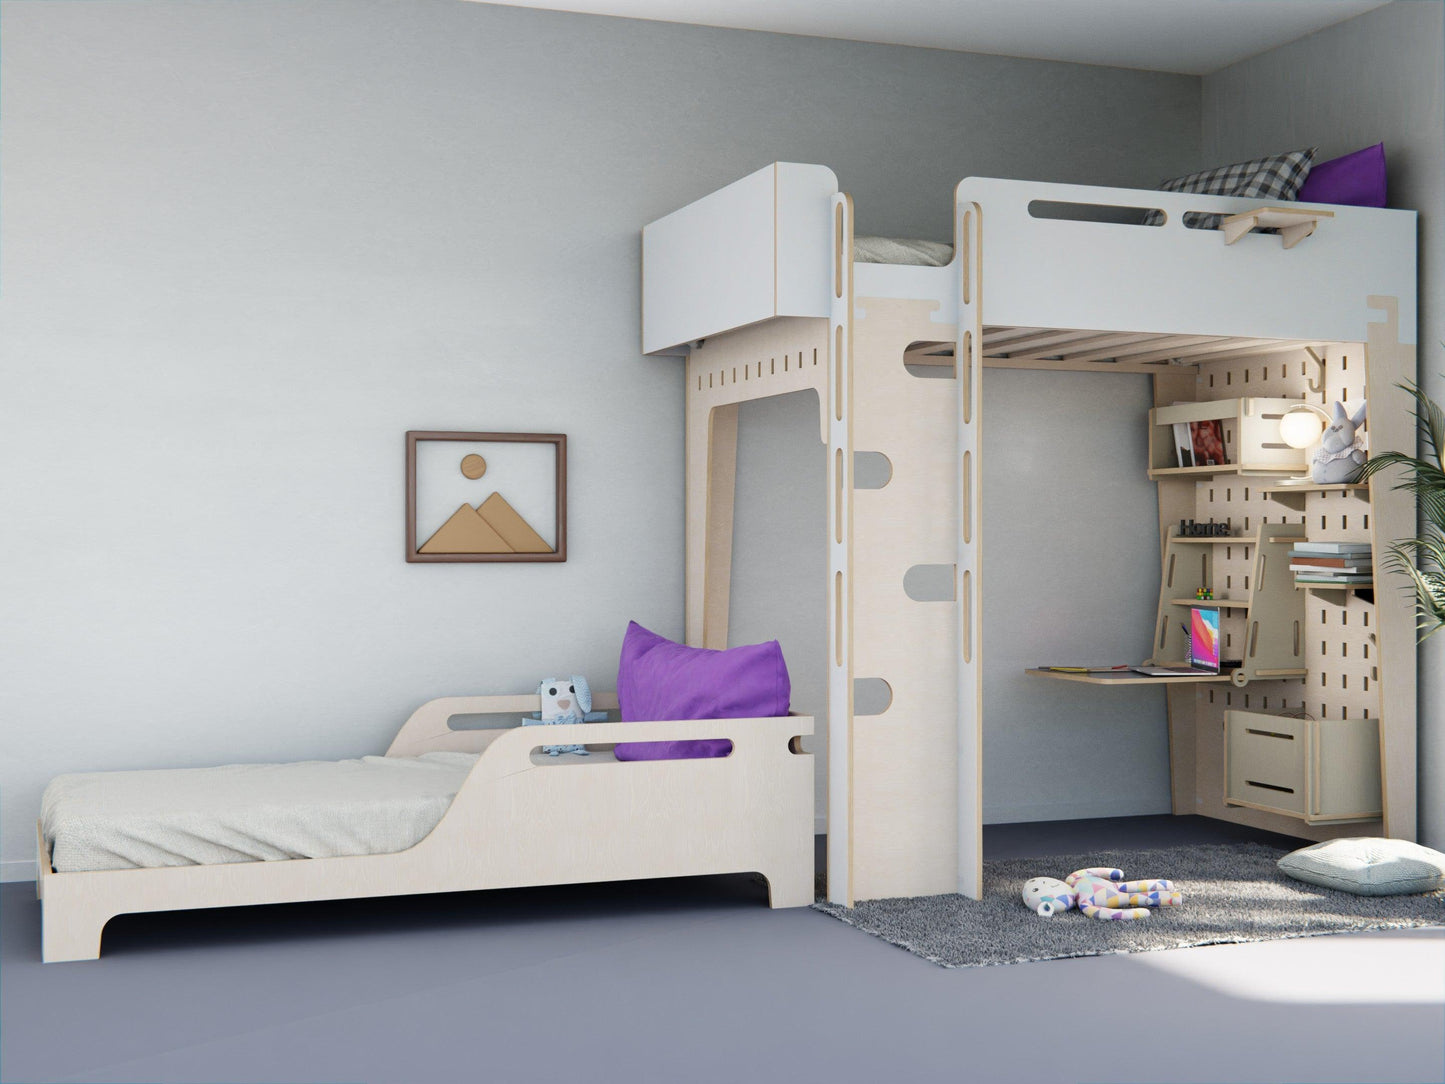 Multifunctional design in our plywood loft bed and study desk combo. Space-saving never looked so good.